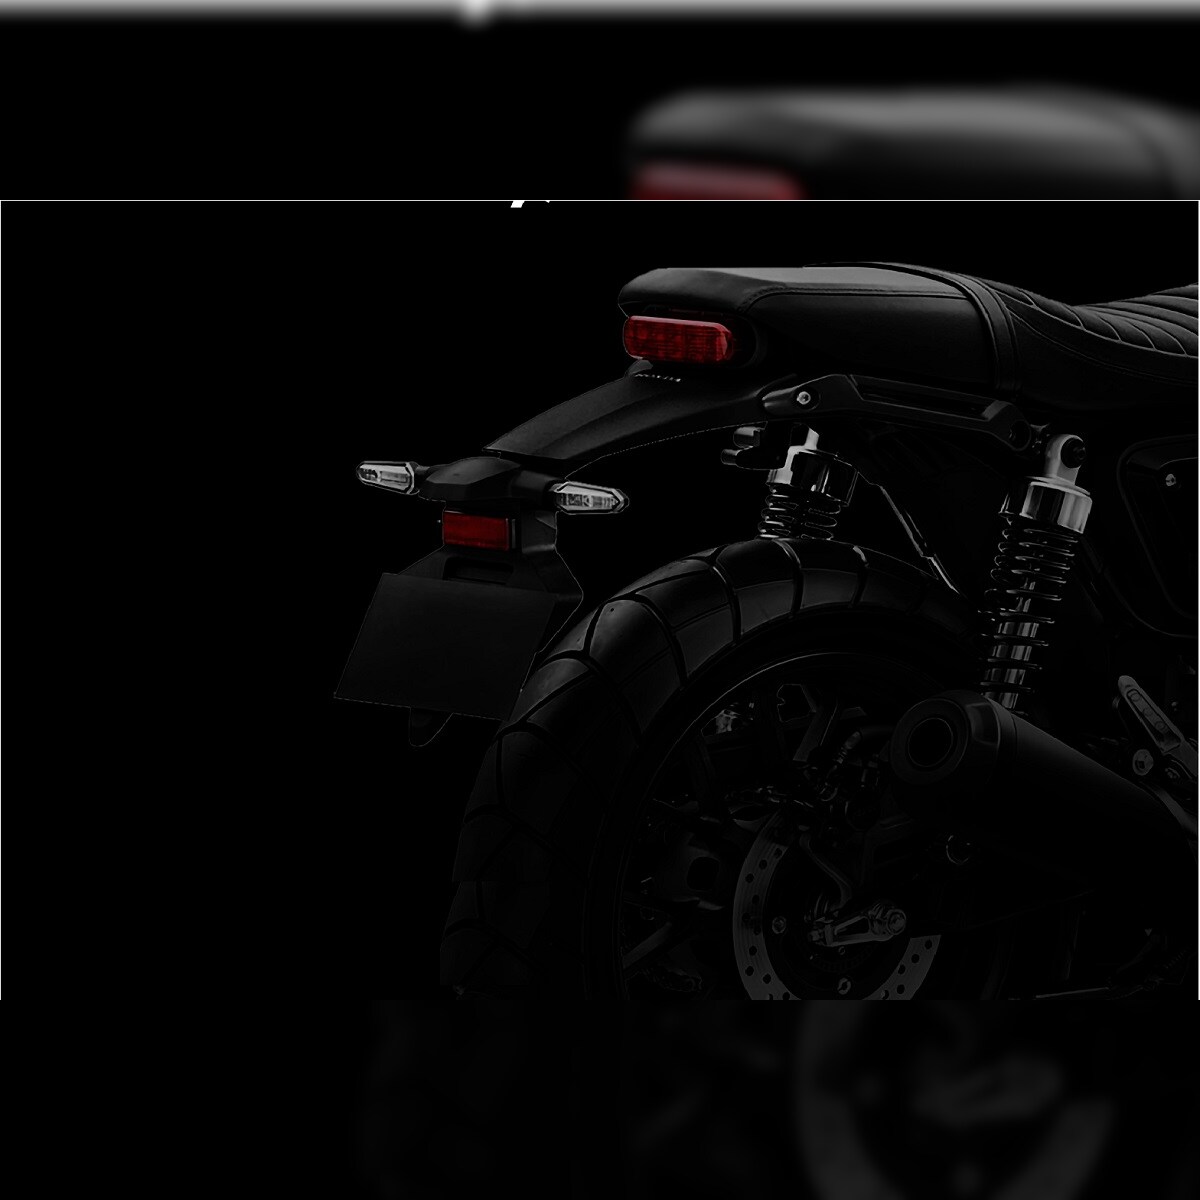 Honda H Ness Cb350 Based Cafe Racer Teased Ahead Of Launch On Feb 16 To Get Retro Scrambler Styling